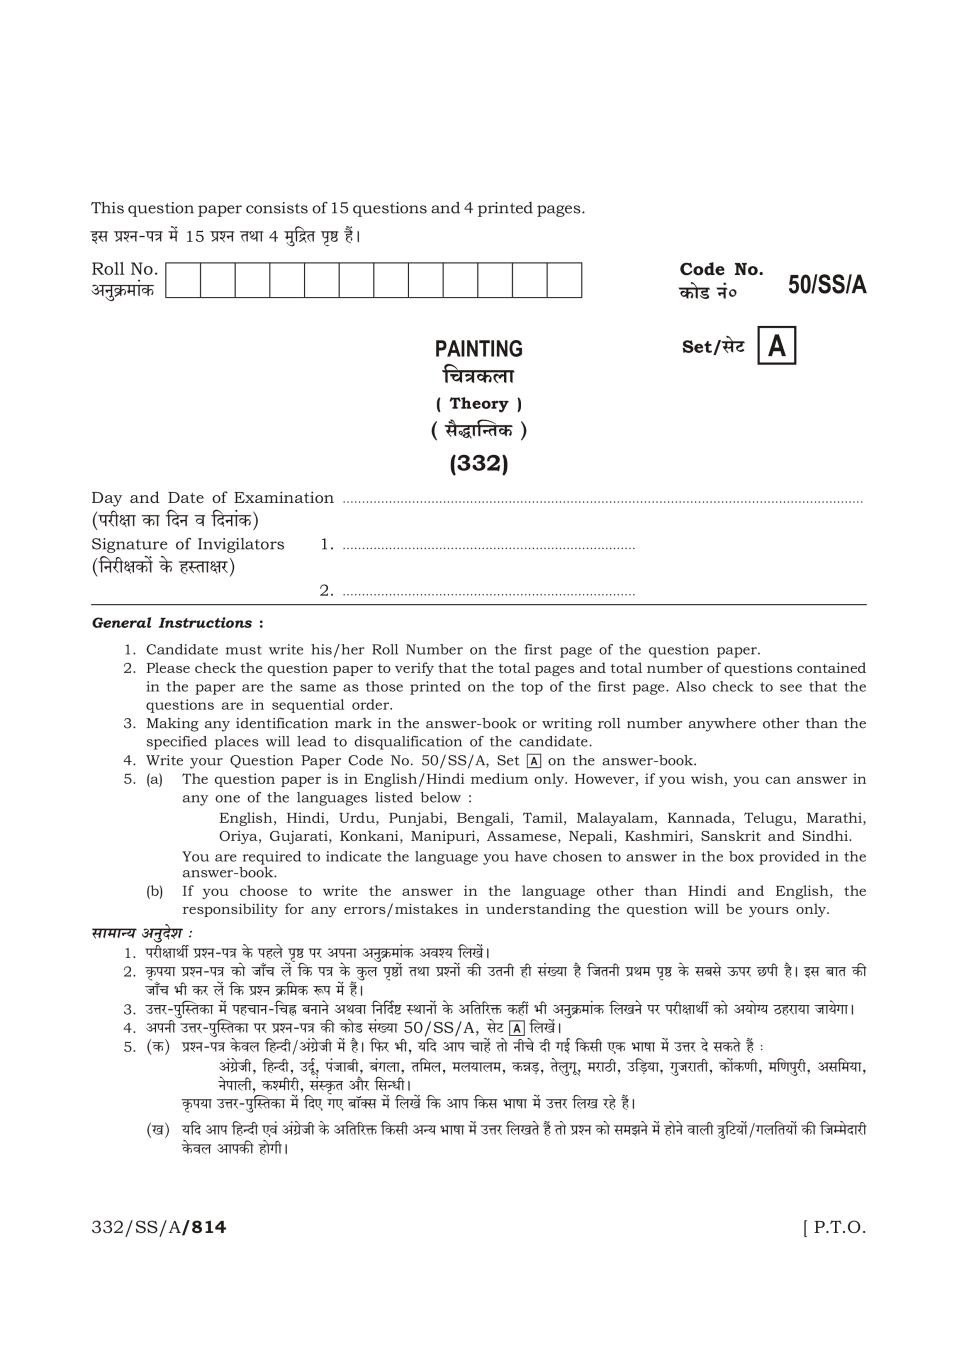 NIOS Class 12 Question Paper Apr 2015 - Painting - Page 1